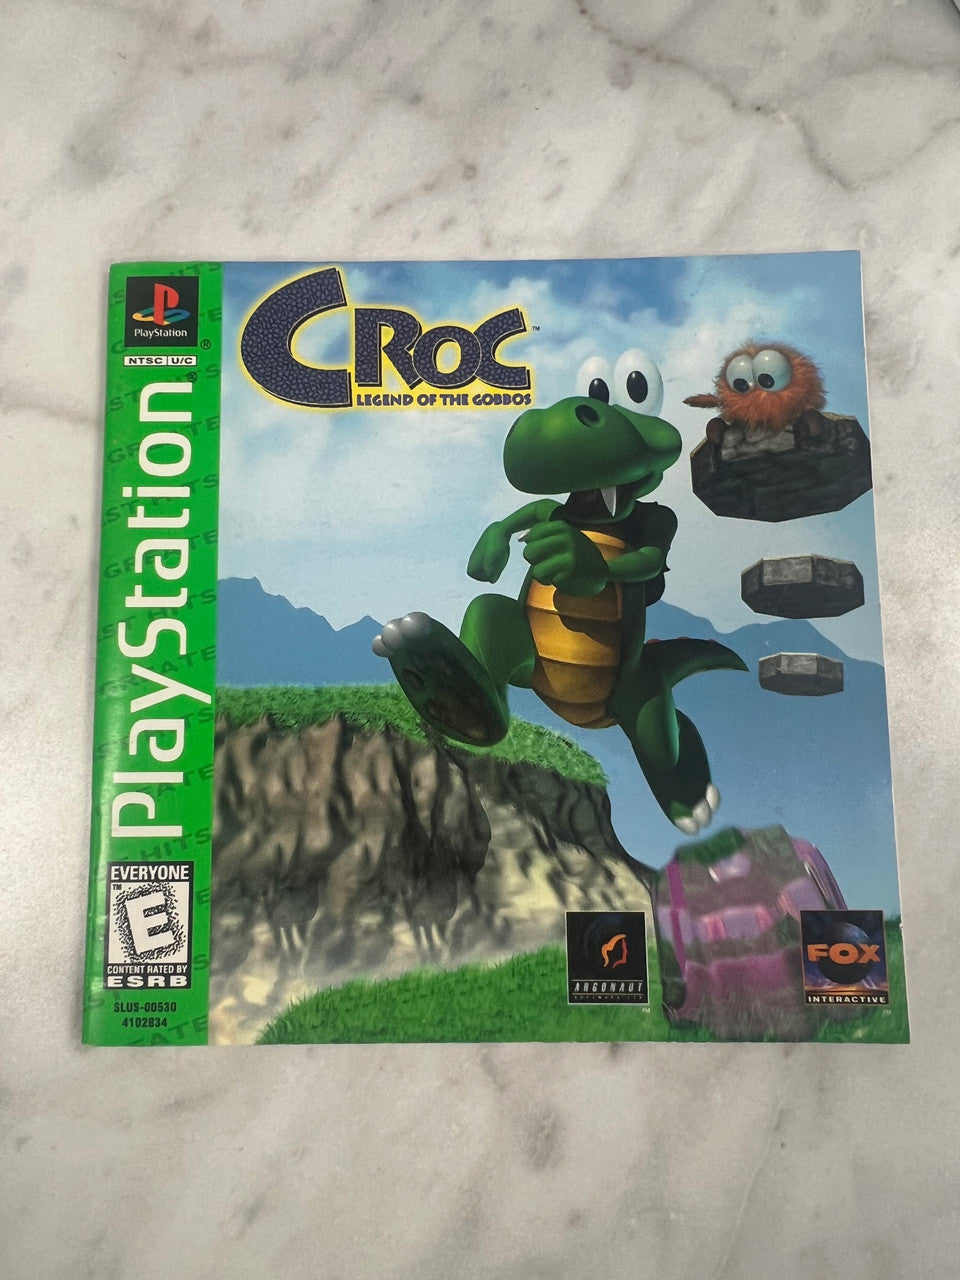 Croc Legend of the Gobbos PS1 Playstation 1 Manual only